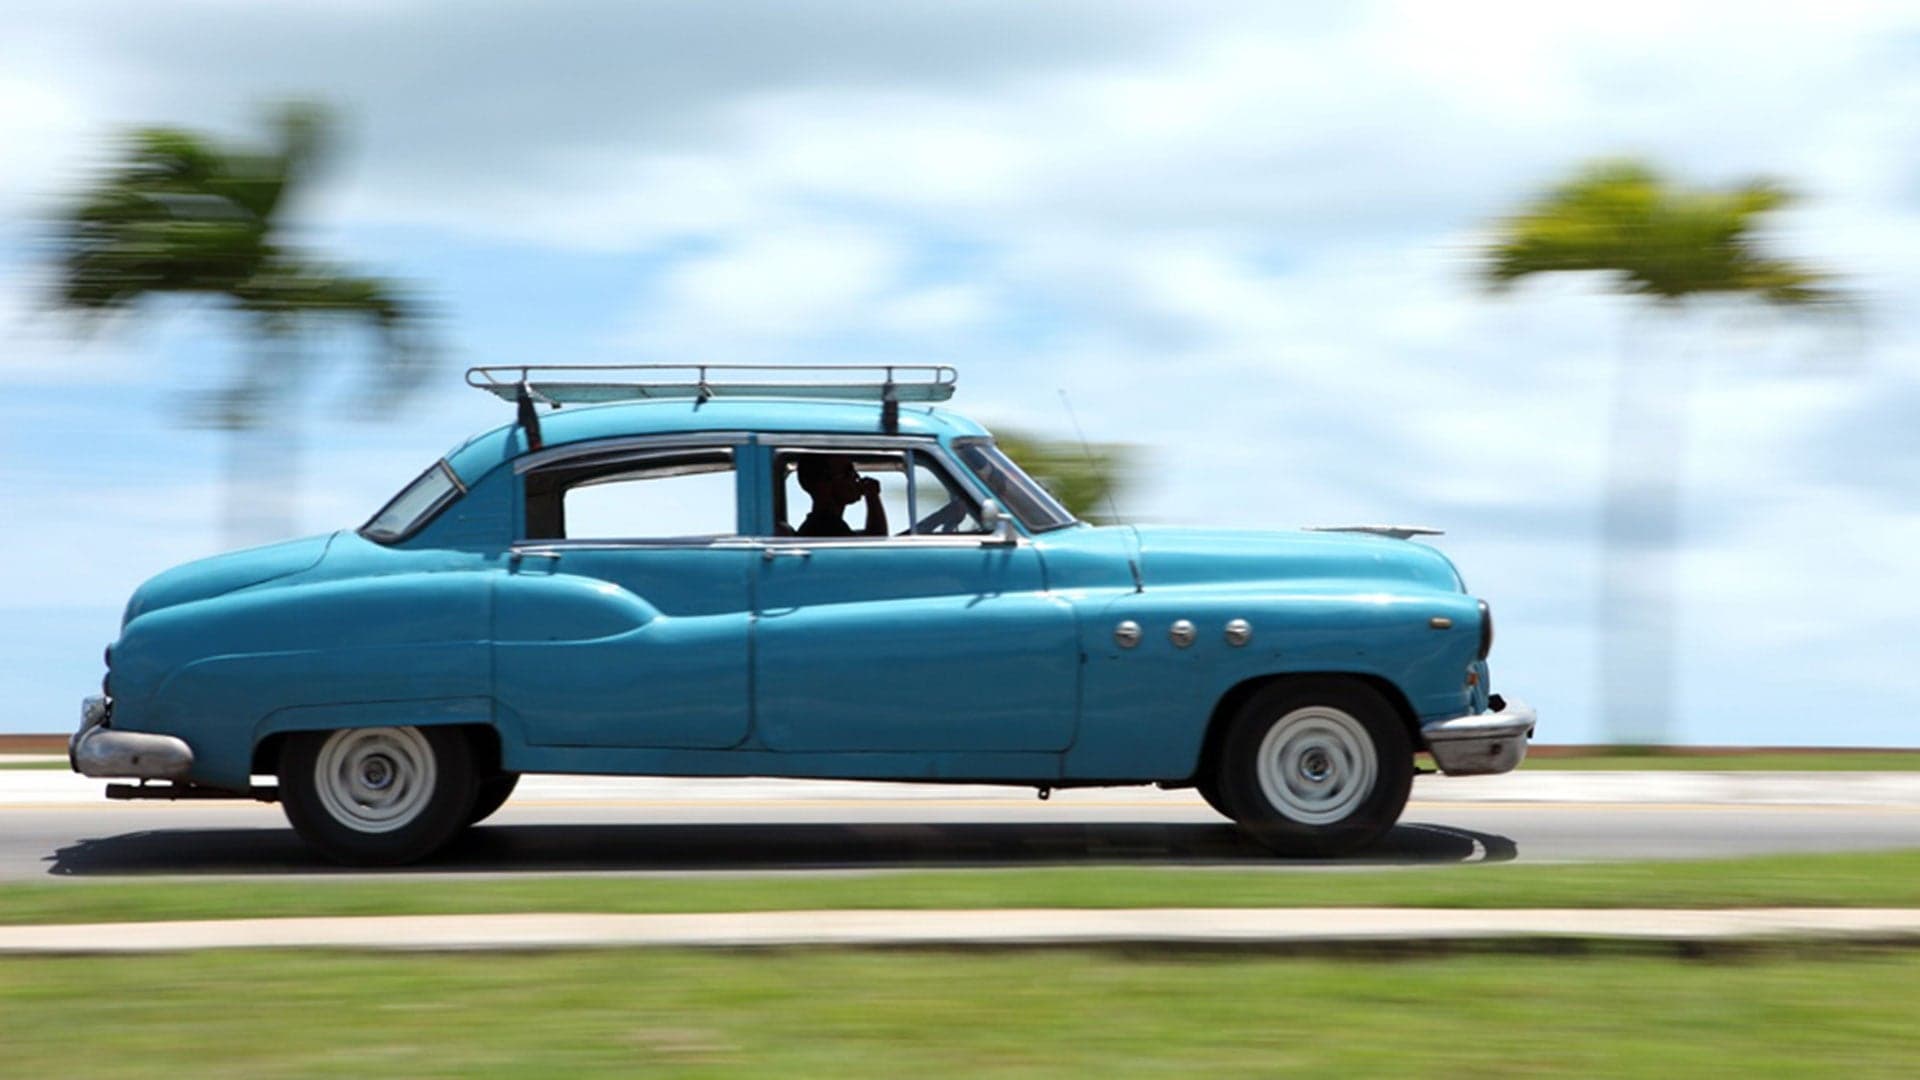 This Might Be Your Last Chance to See Cuba’s Classic Cars in Their Natural State